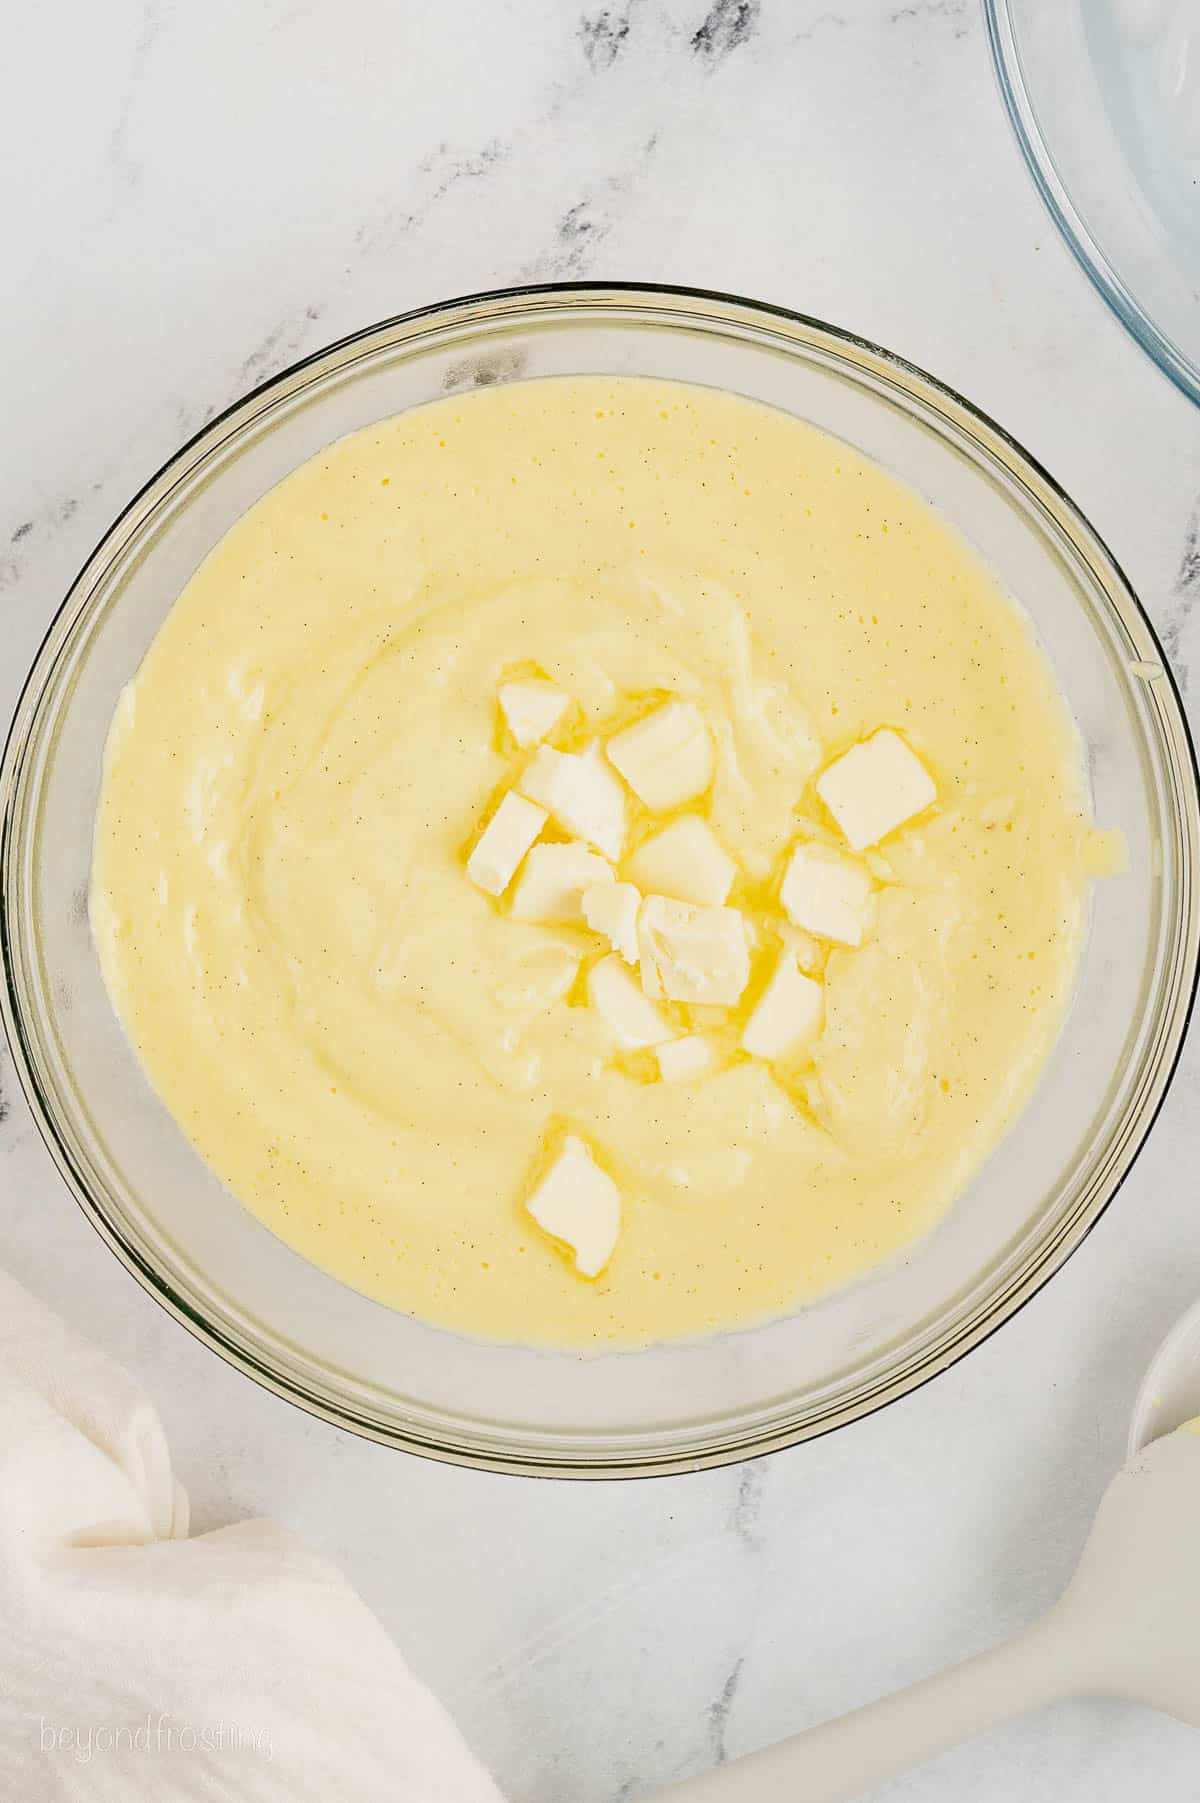 Cubed butter added into a bowl of warm pastry cream.